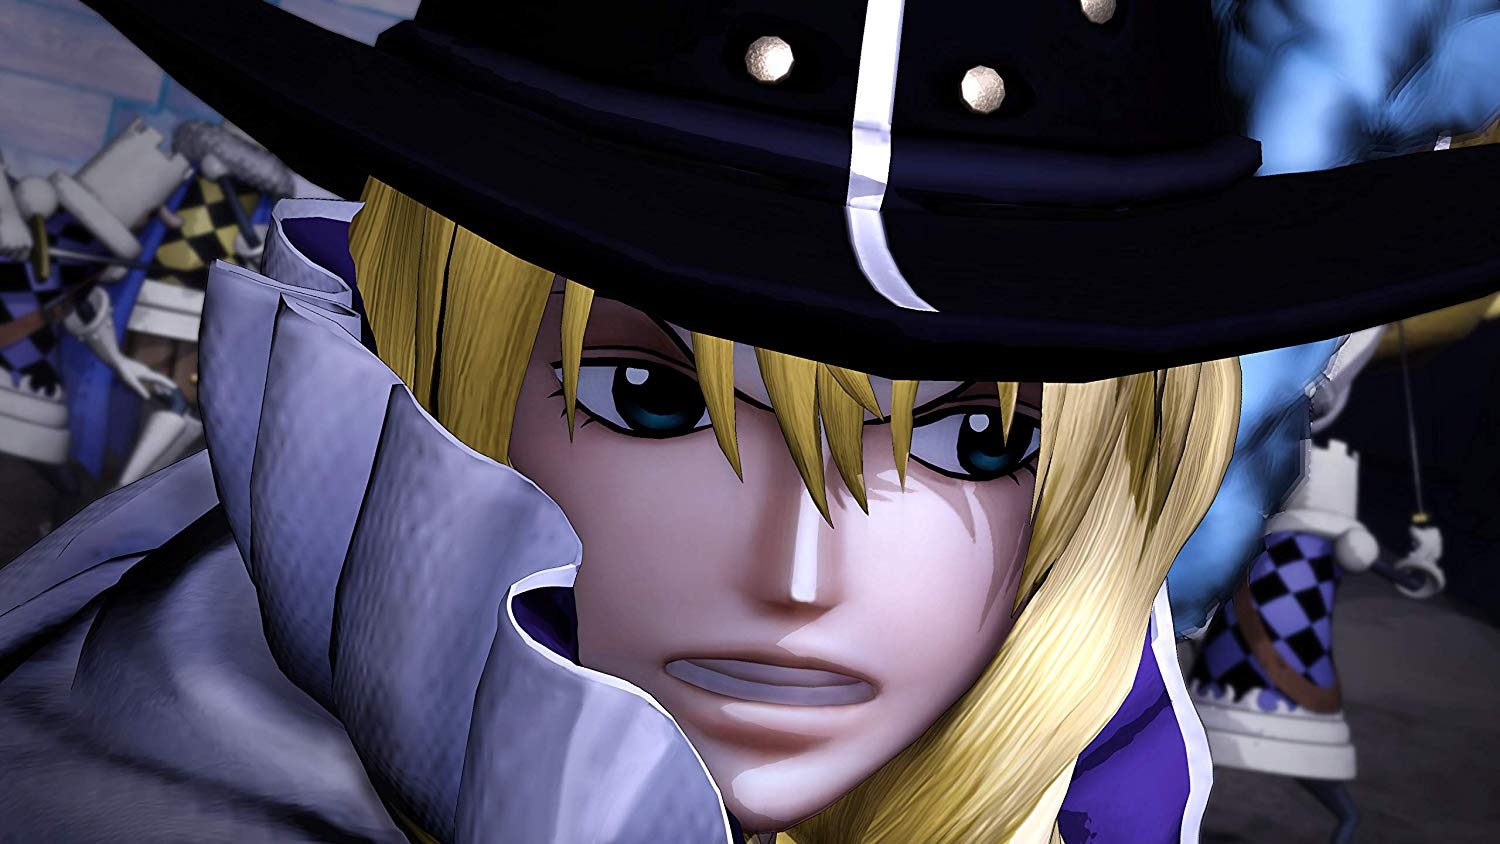 One Piece: Pirate Warriors 4 New Trailer Launches With Preview Of Online Co-Op